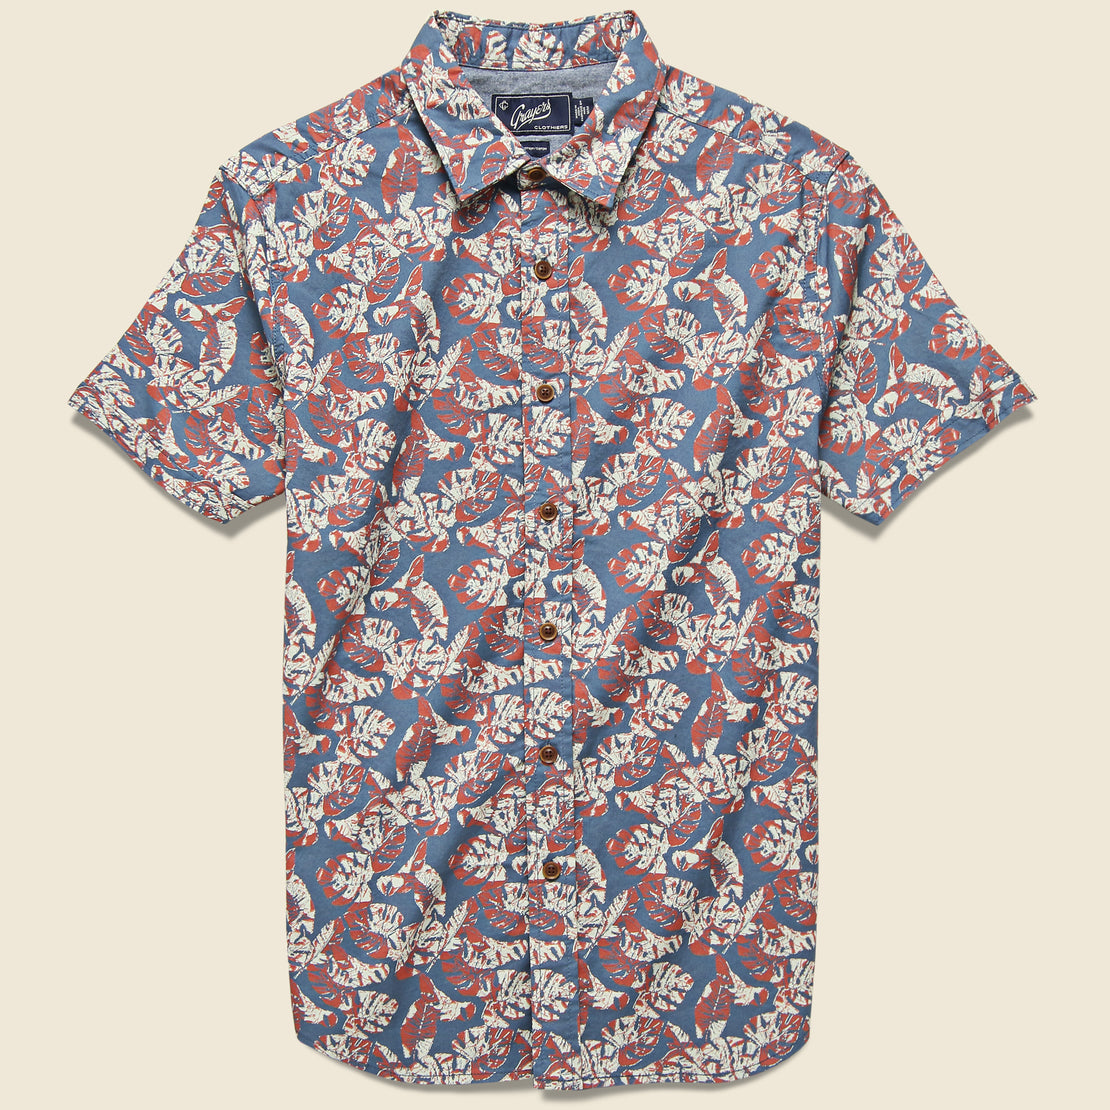 Grayers Floral Printed Gauze Shirt - Faded Navy/Red/Cream